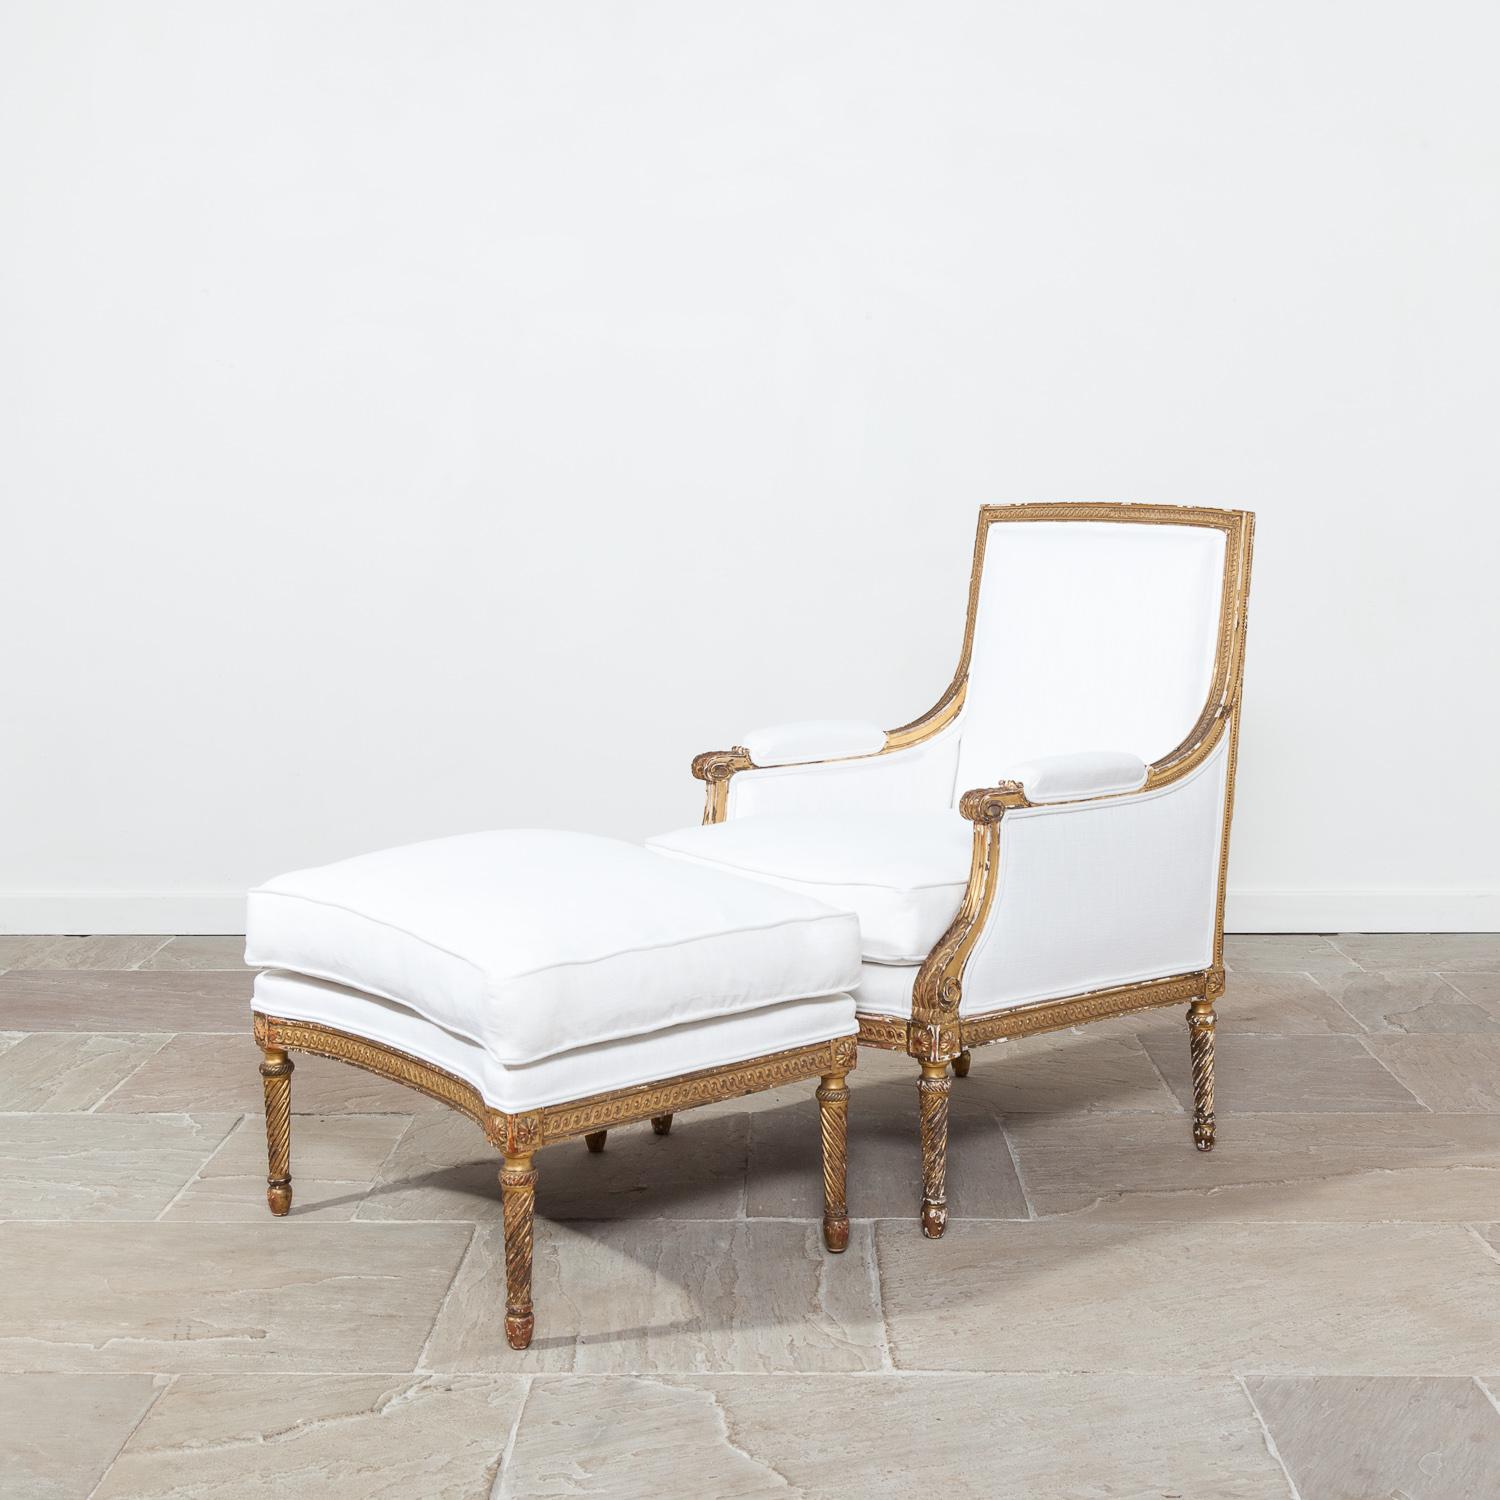 19th Century French Giltwood Duchesse Brisee, newly upholstered in White Linen 3